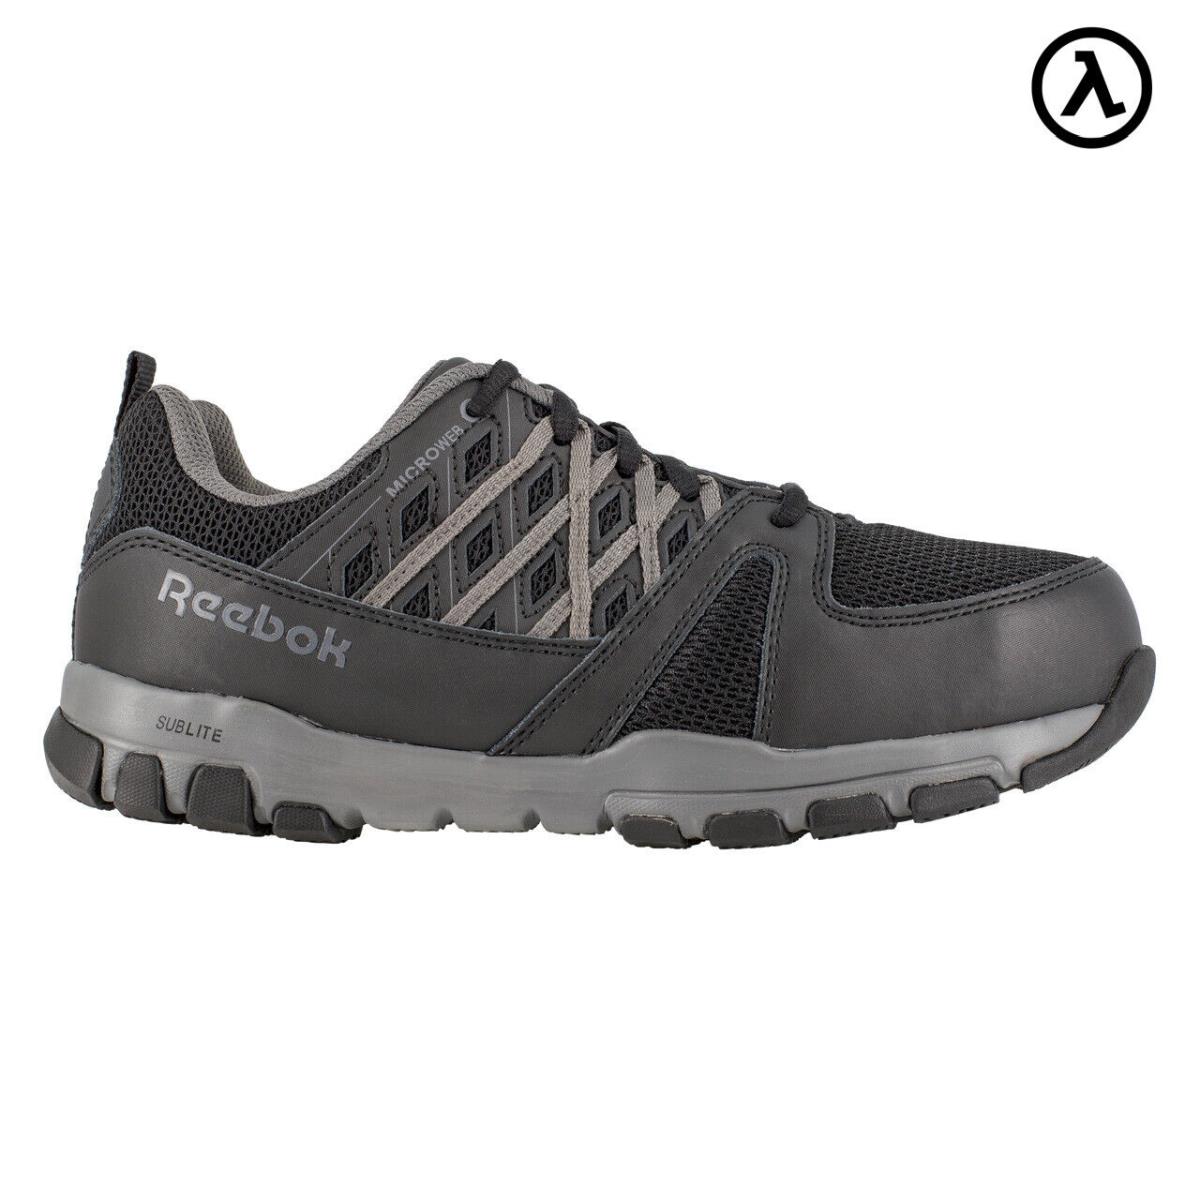 Reebok Sublite Work Women`s Athletic Shoe Black with Grey Trim Boots RB416